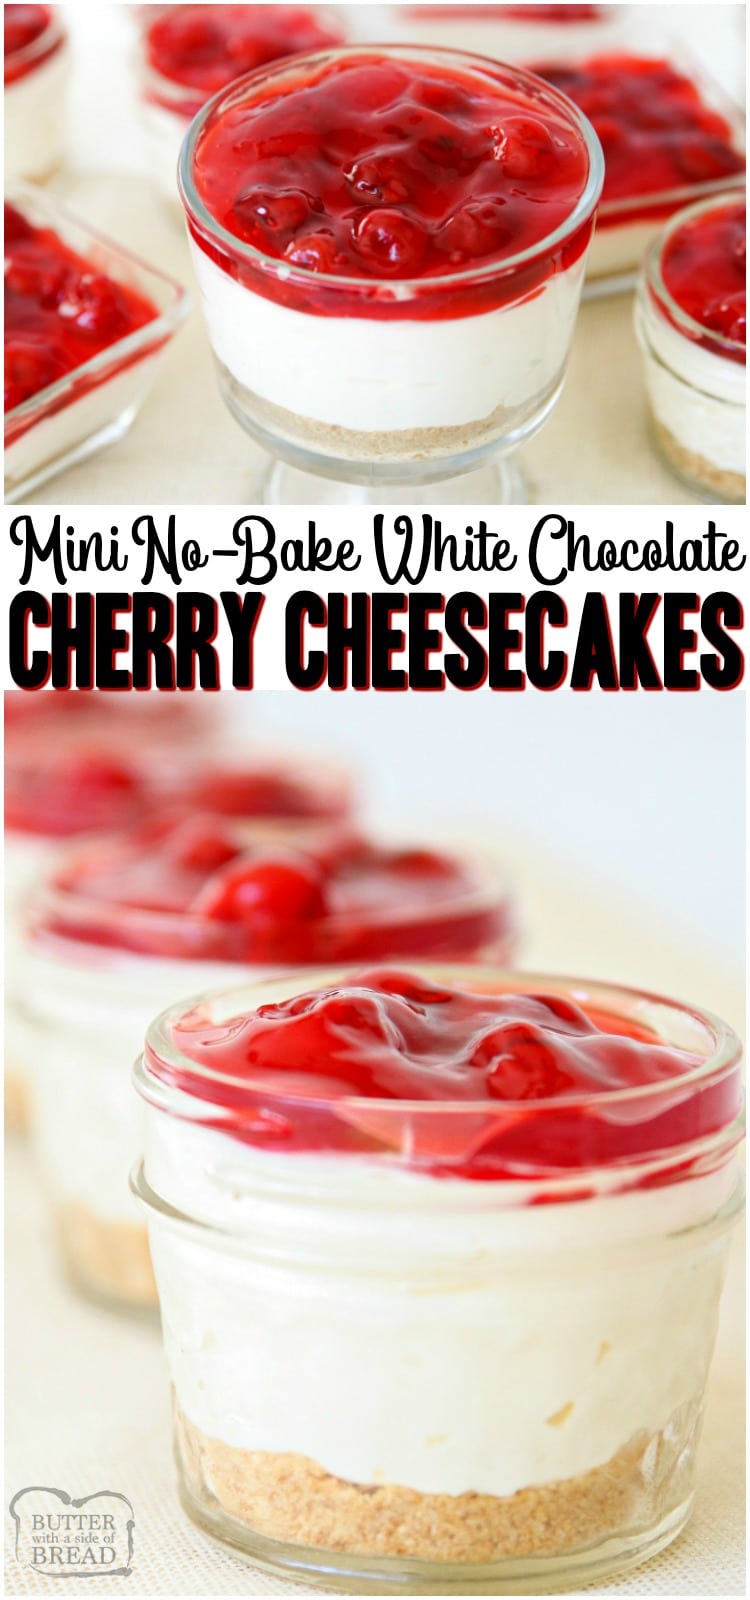 White Chocolate Cherry Cheesecakes are sweet & creamy no-bake cheesecakes topped with tangy cherry pie filling. Simple, easy to make cheesecake desserts perfect for entertaining! #cheesecake #cherry #nobake #easyrecipe #easydessert #dessert from BUTTER WITH A SIDE OF BREAD